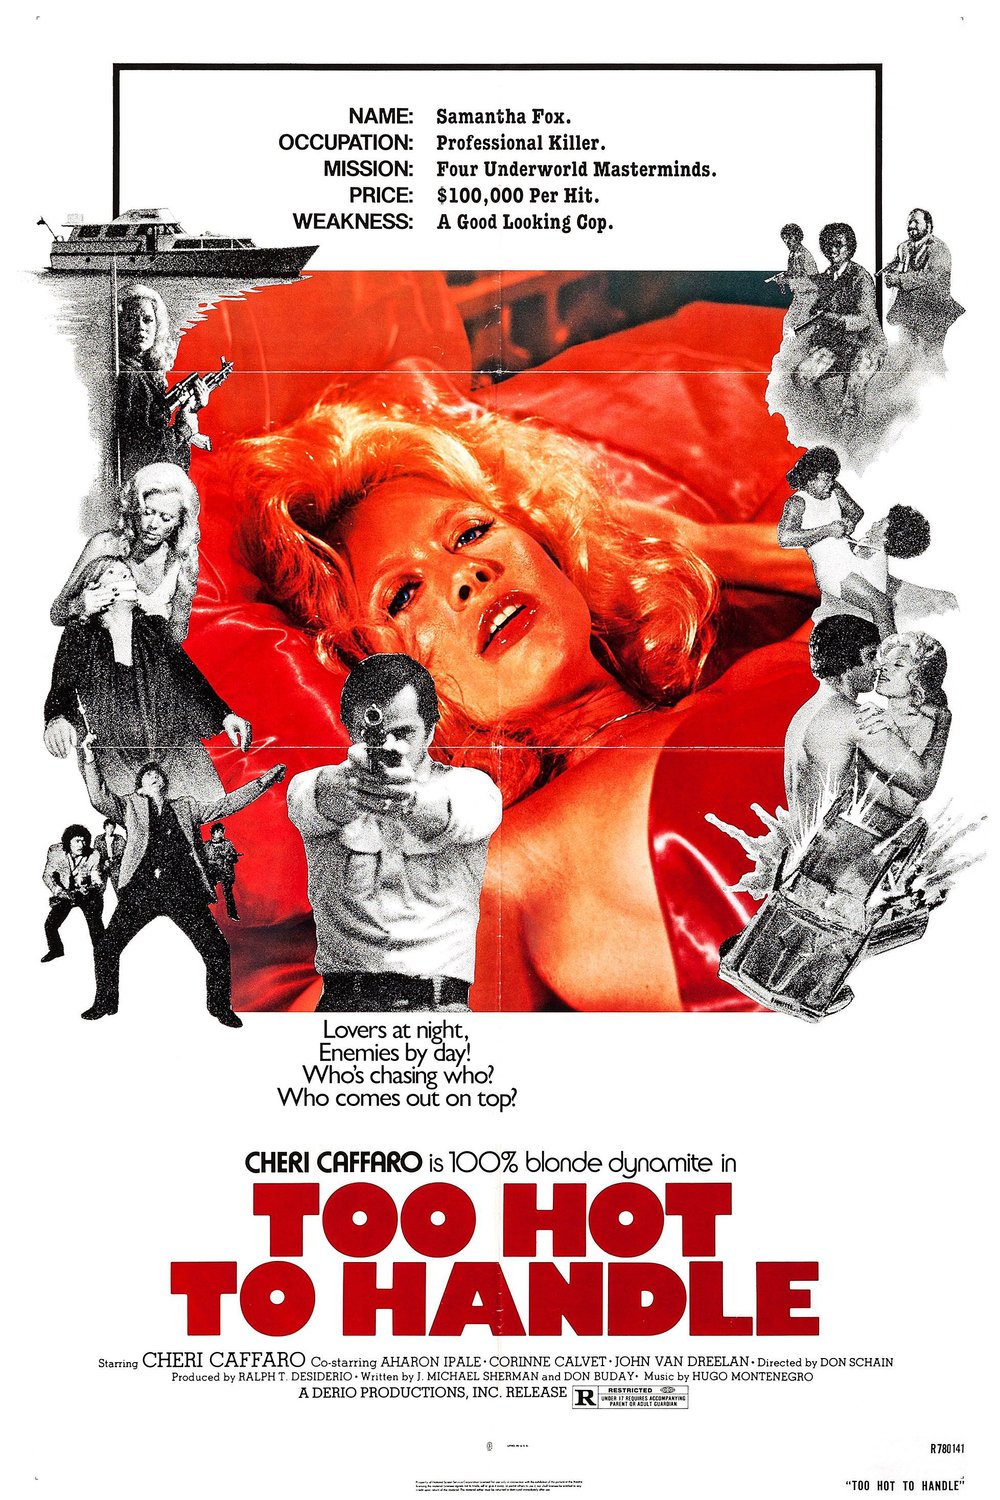 Poster of the movie Too Hot to Handle